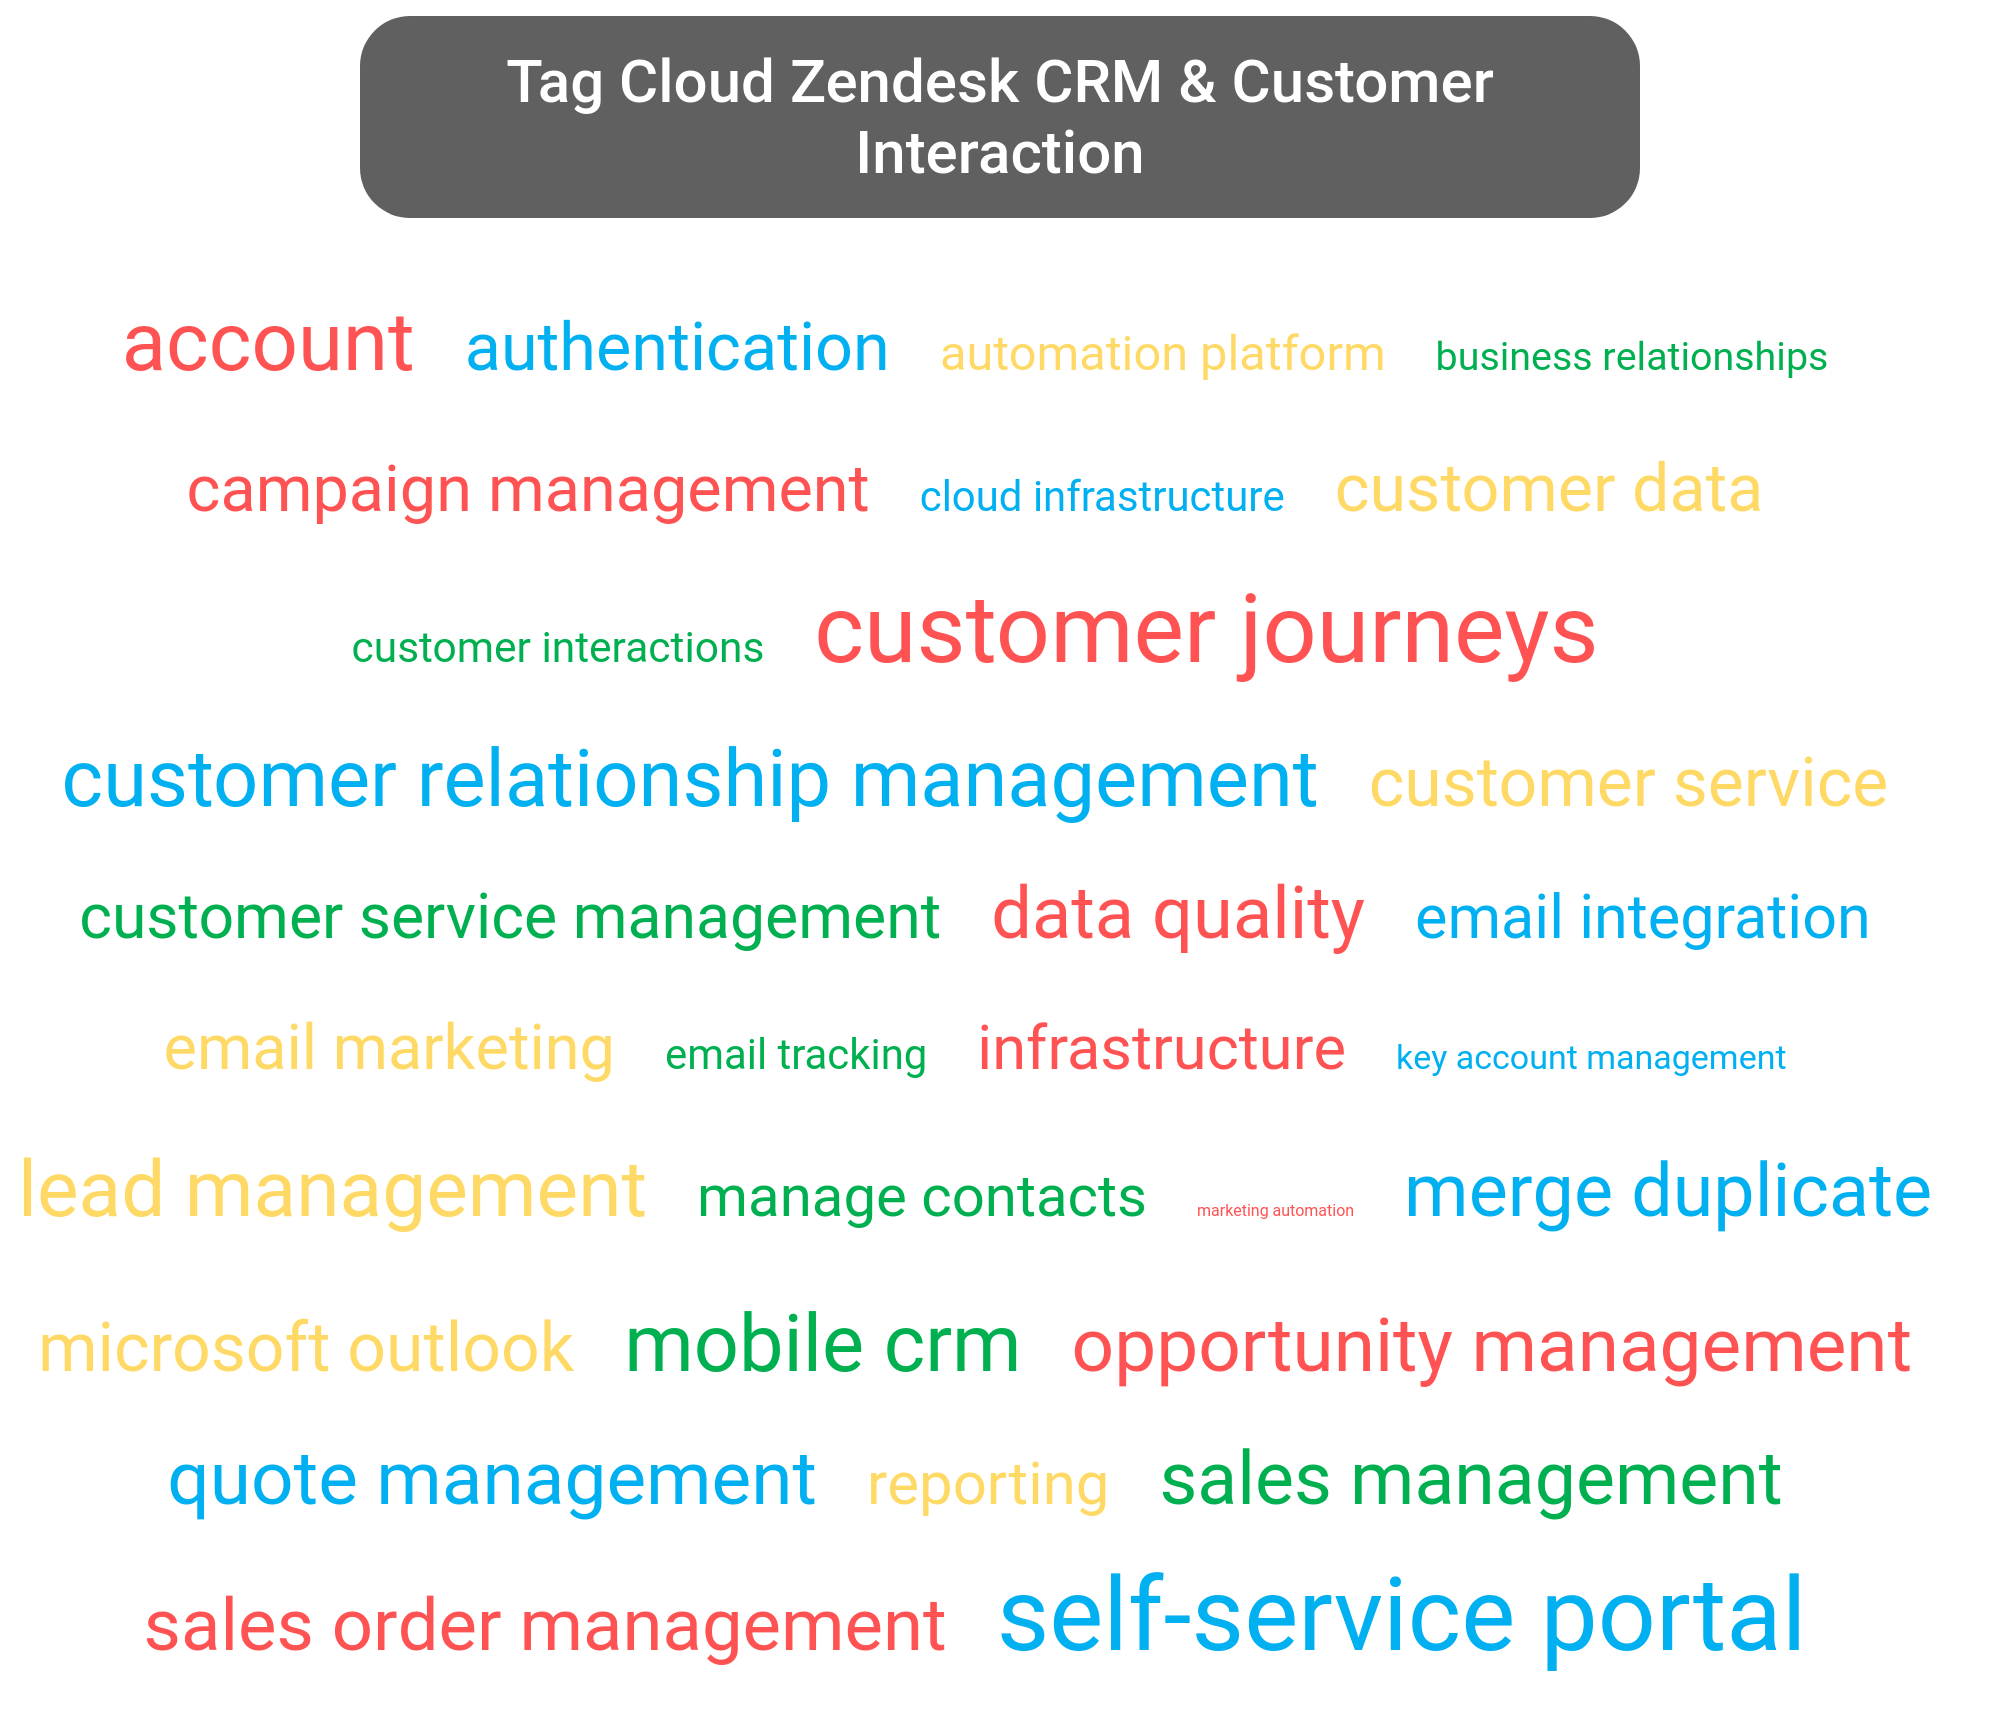 Tag cloud of the Zendesk CRM tools.